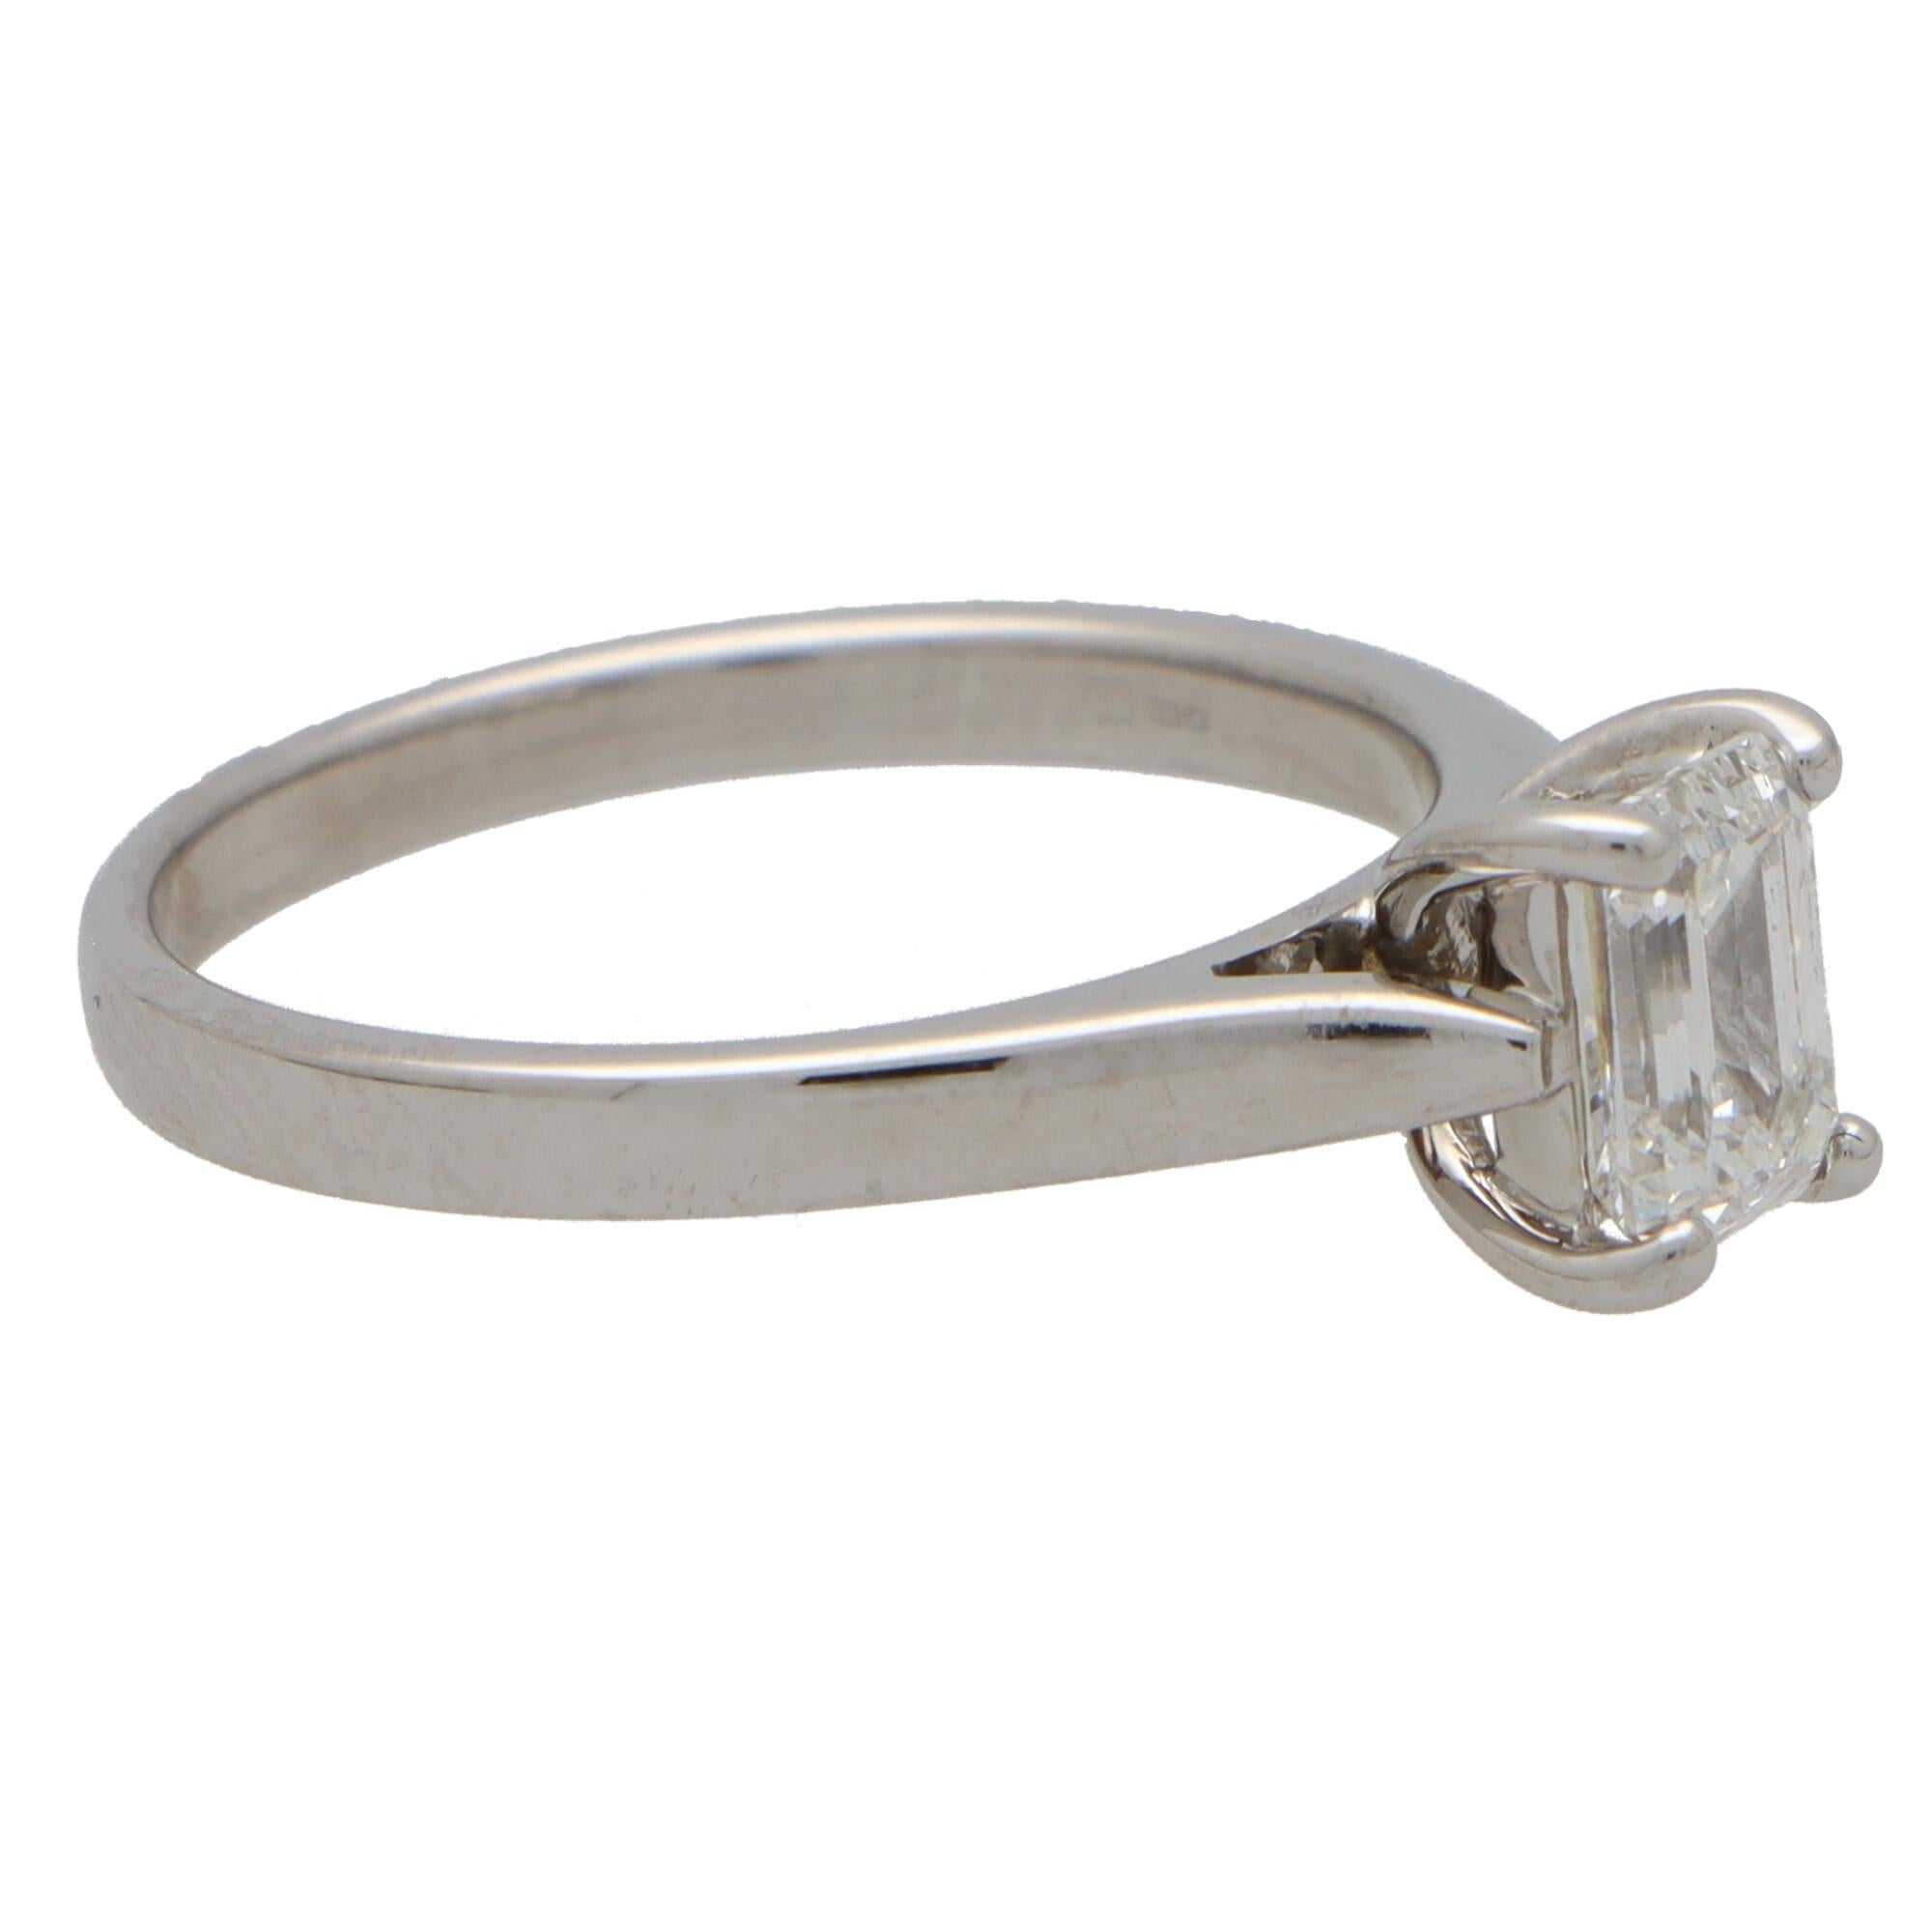 An extremely elegant emerald cut diamond single solitaire engagement ring set in 18k white gold.

The piece solely features a beautiful certified 0.91 carat emerald cut diamond. The diamond is four claw set to centre within a v-shaped double gallery